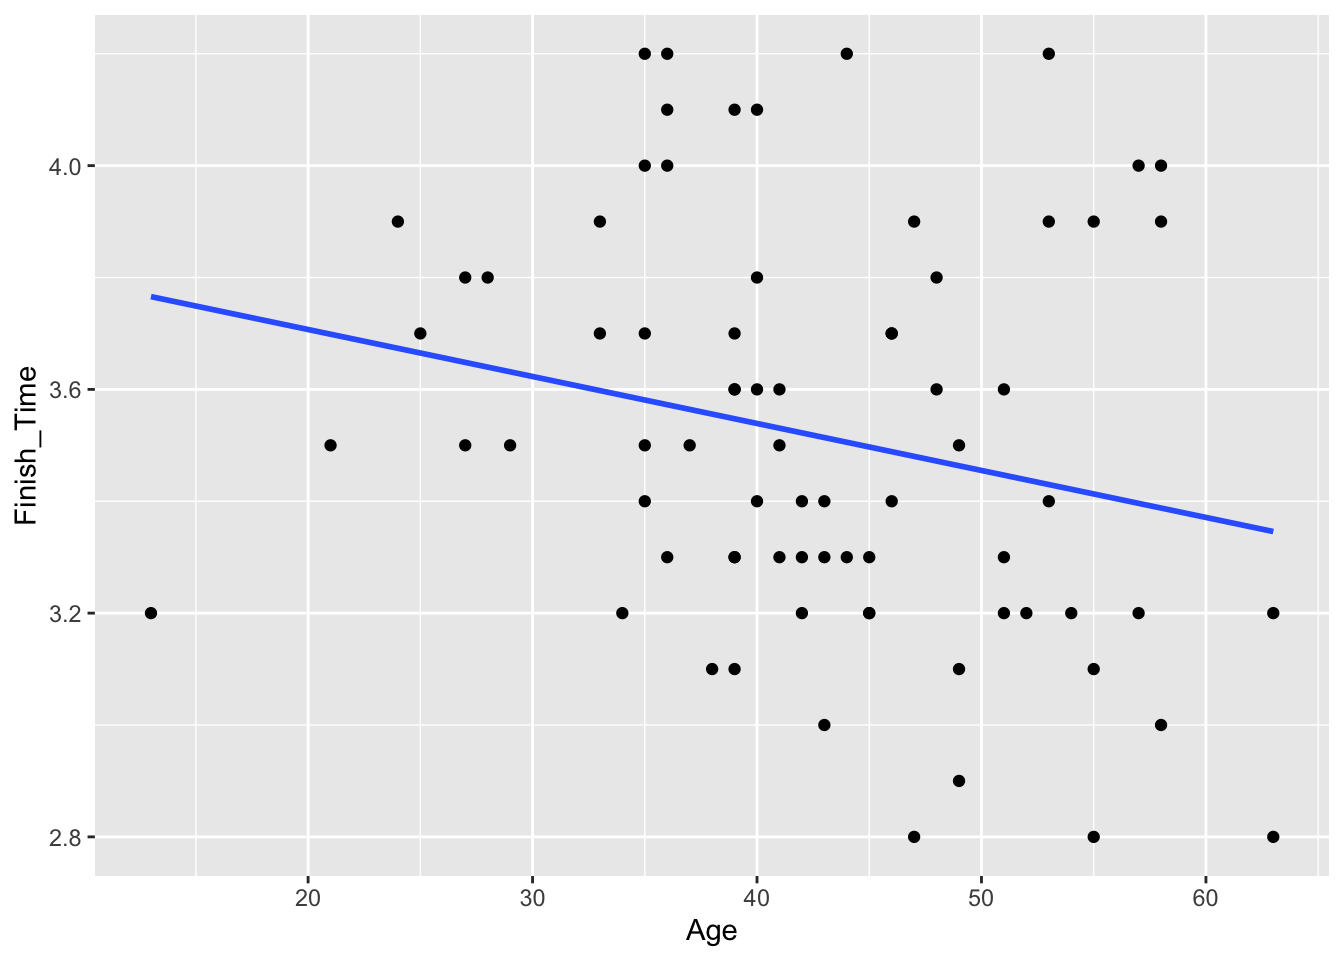 A cross-sectional sample of 75 bike riders showing their age in years and their finishing time on a long bike ride.